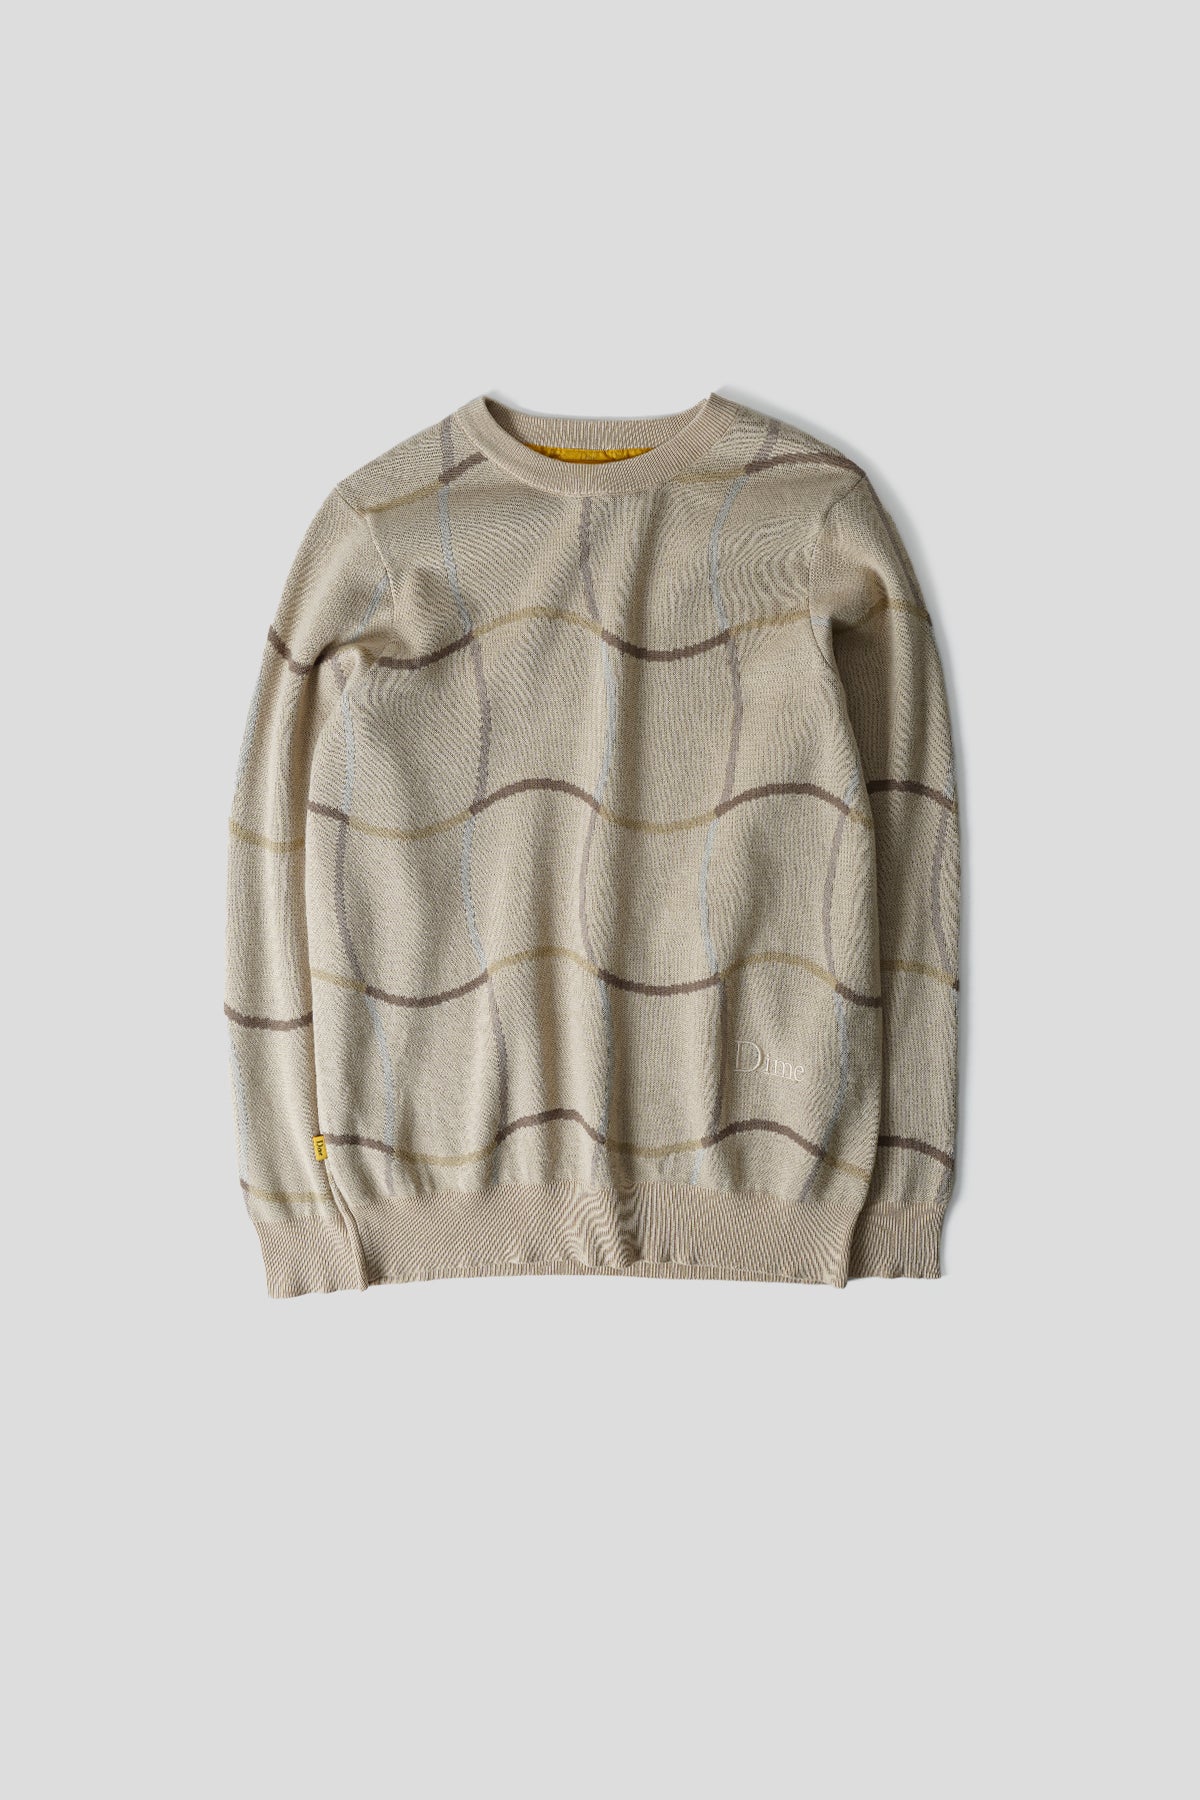 DIME WAVE KNIT SWEATERカラーALMOND - ニット